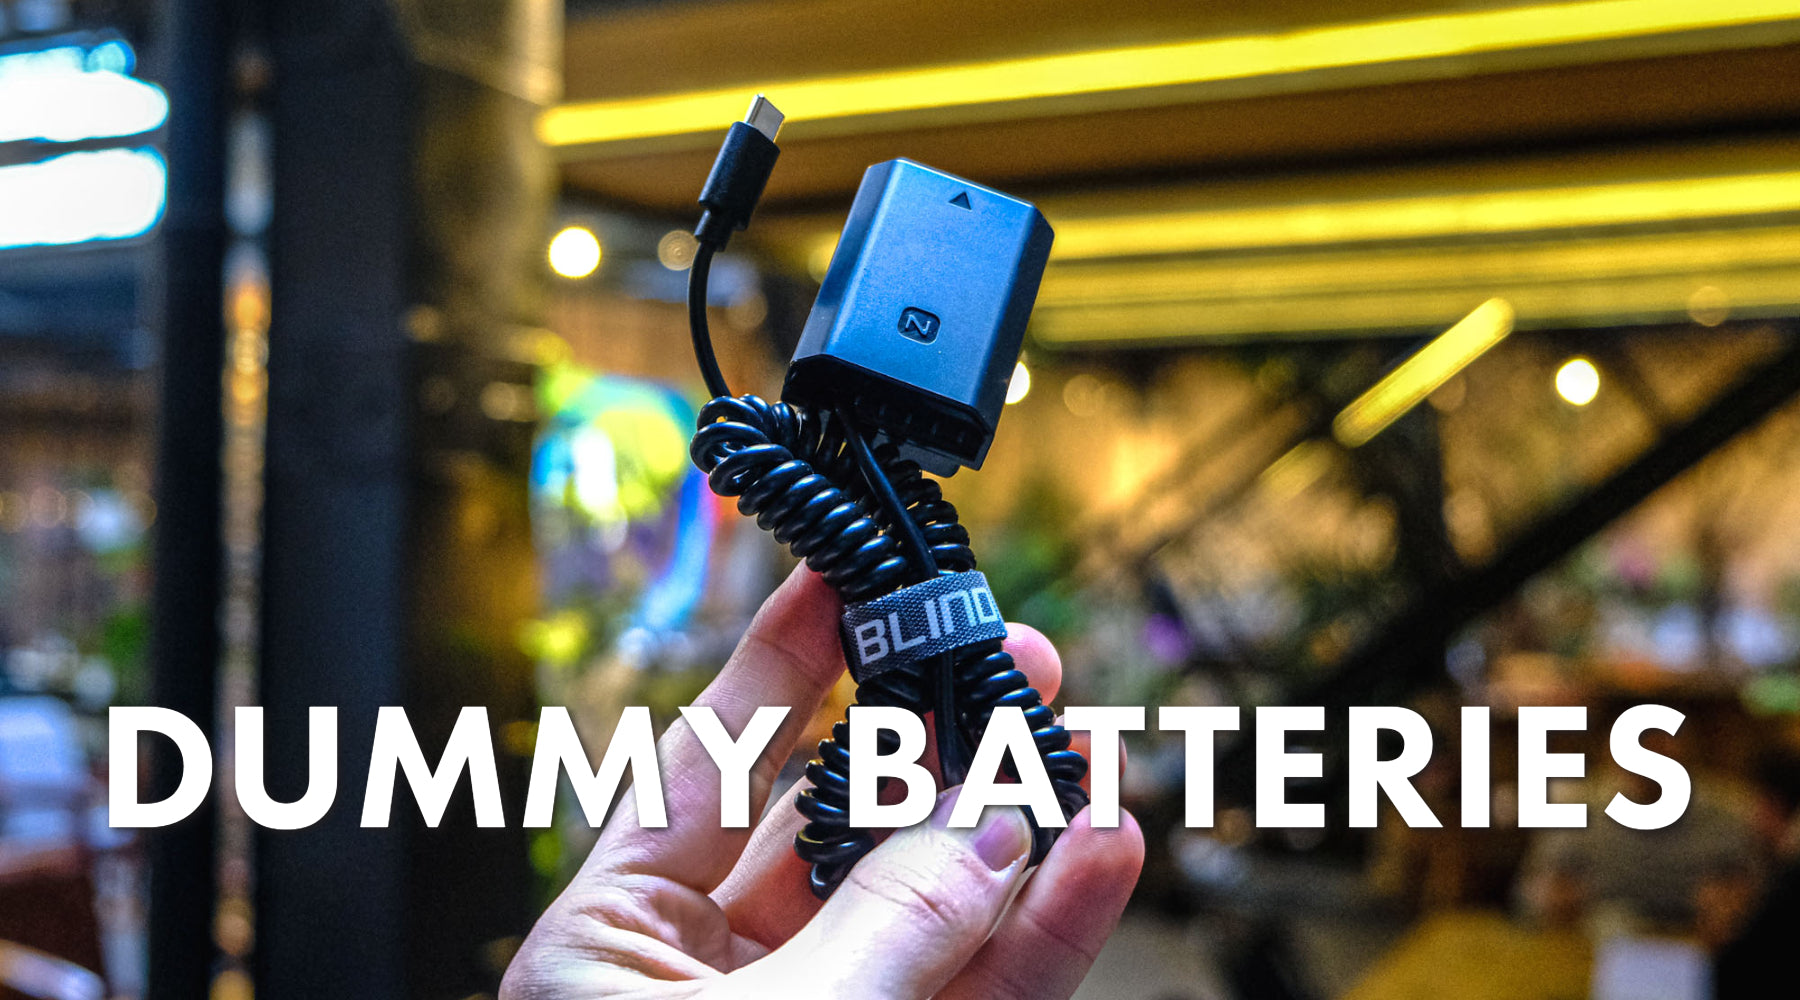 USB-C Dummy Battery vs DC Dummy Batteries: Which One is Right for You?